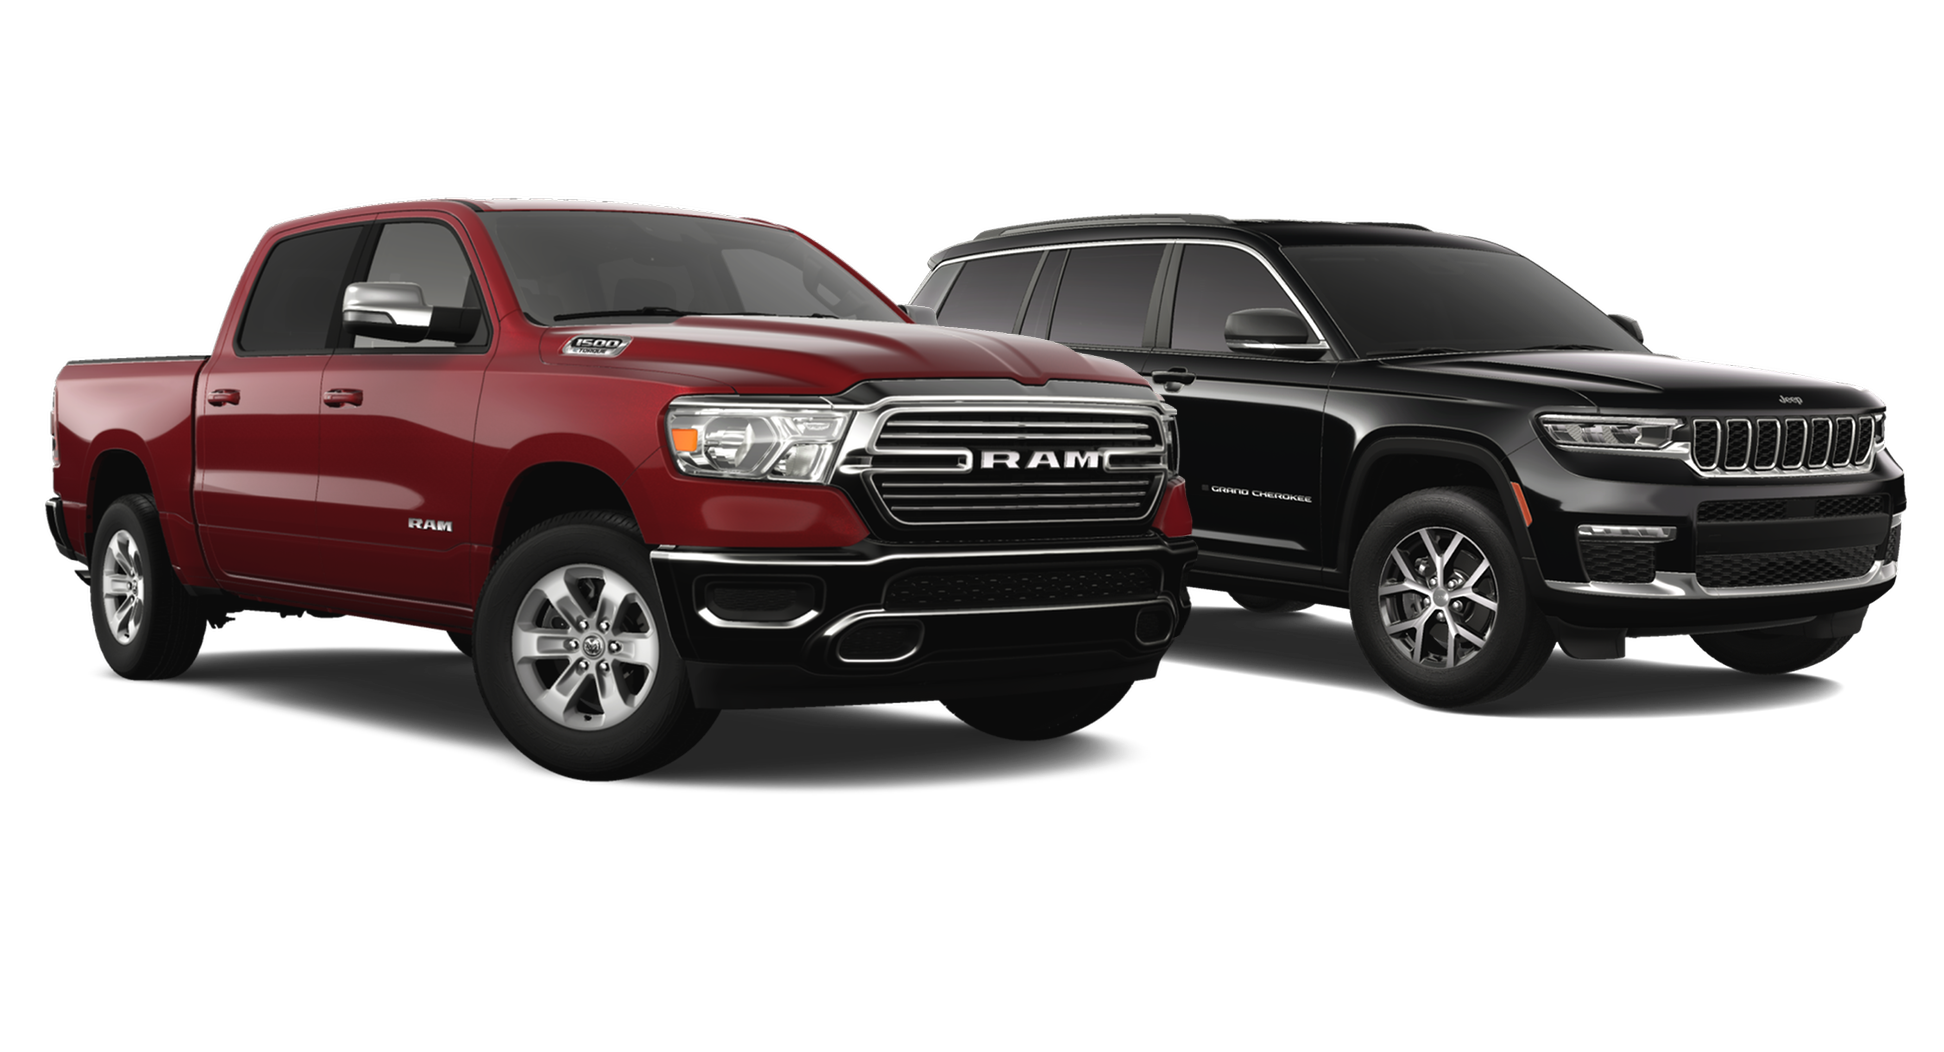 UFM RAM Trucks and Jeep Grand Cherokee for Lease